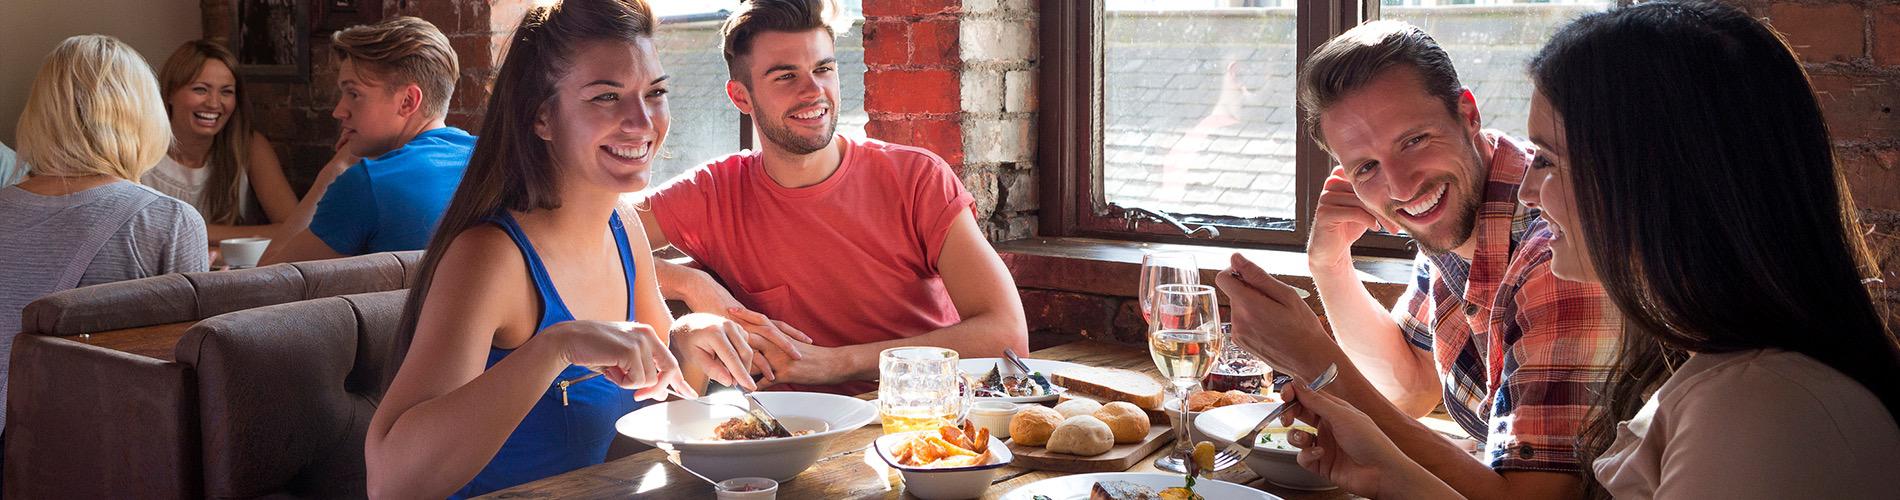 The Weighty Truth About Eating Out